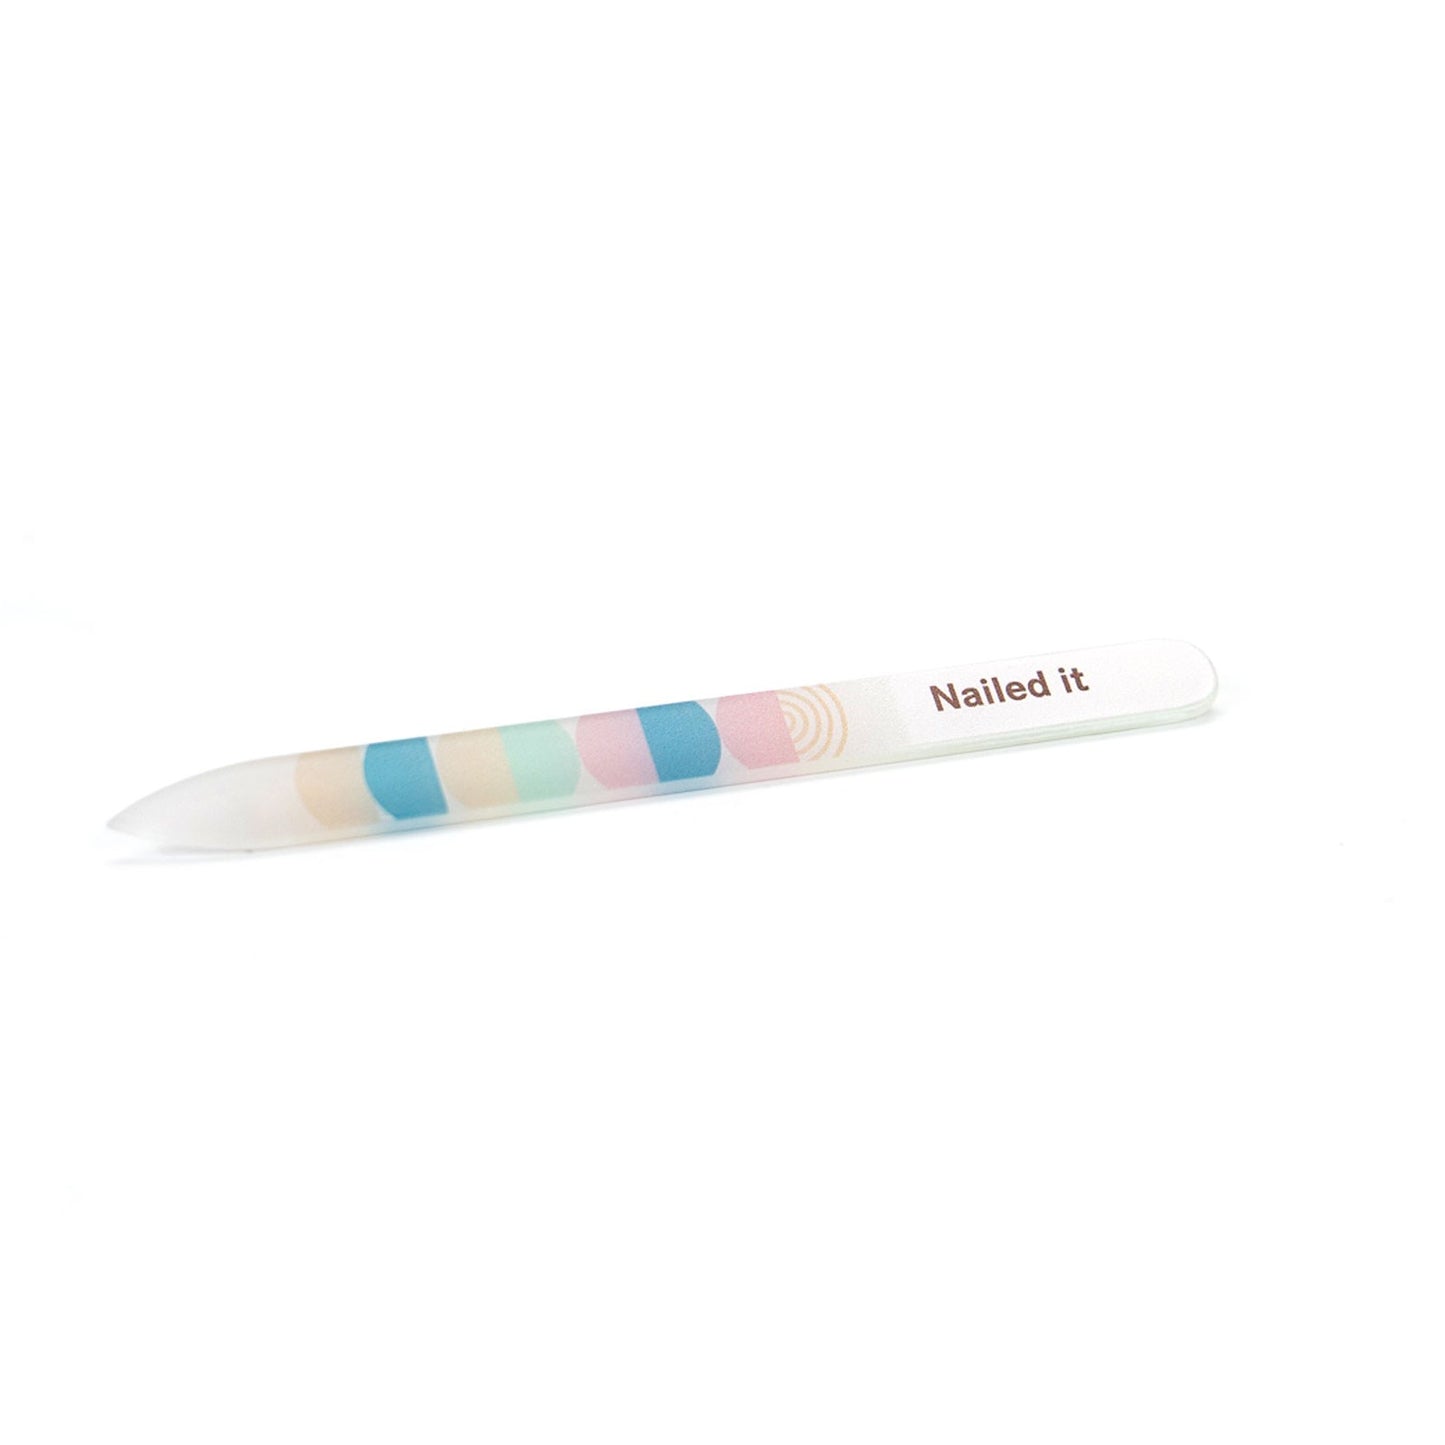 nailed it glass nail file on a white background